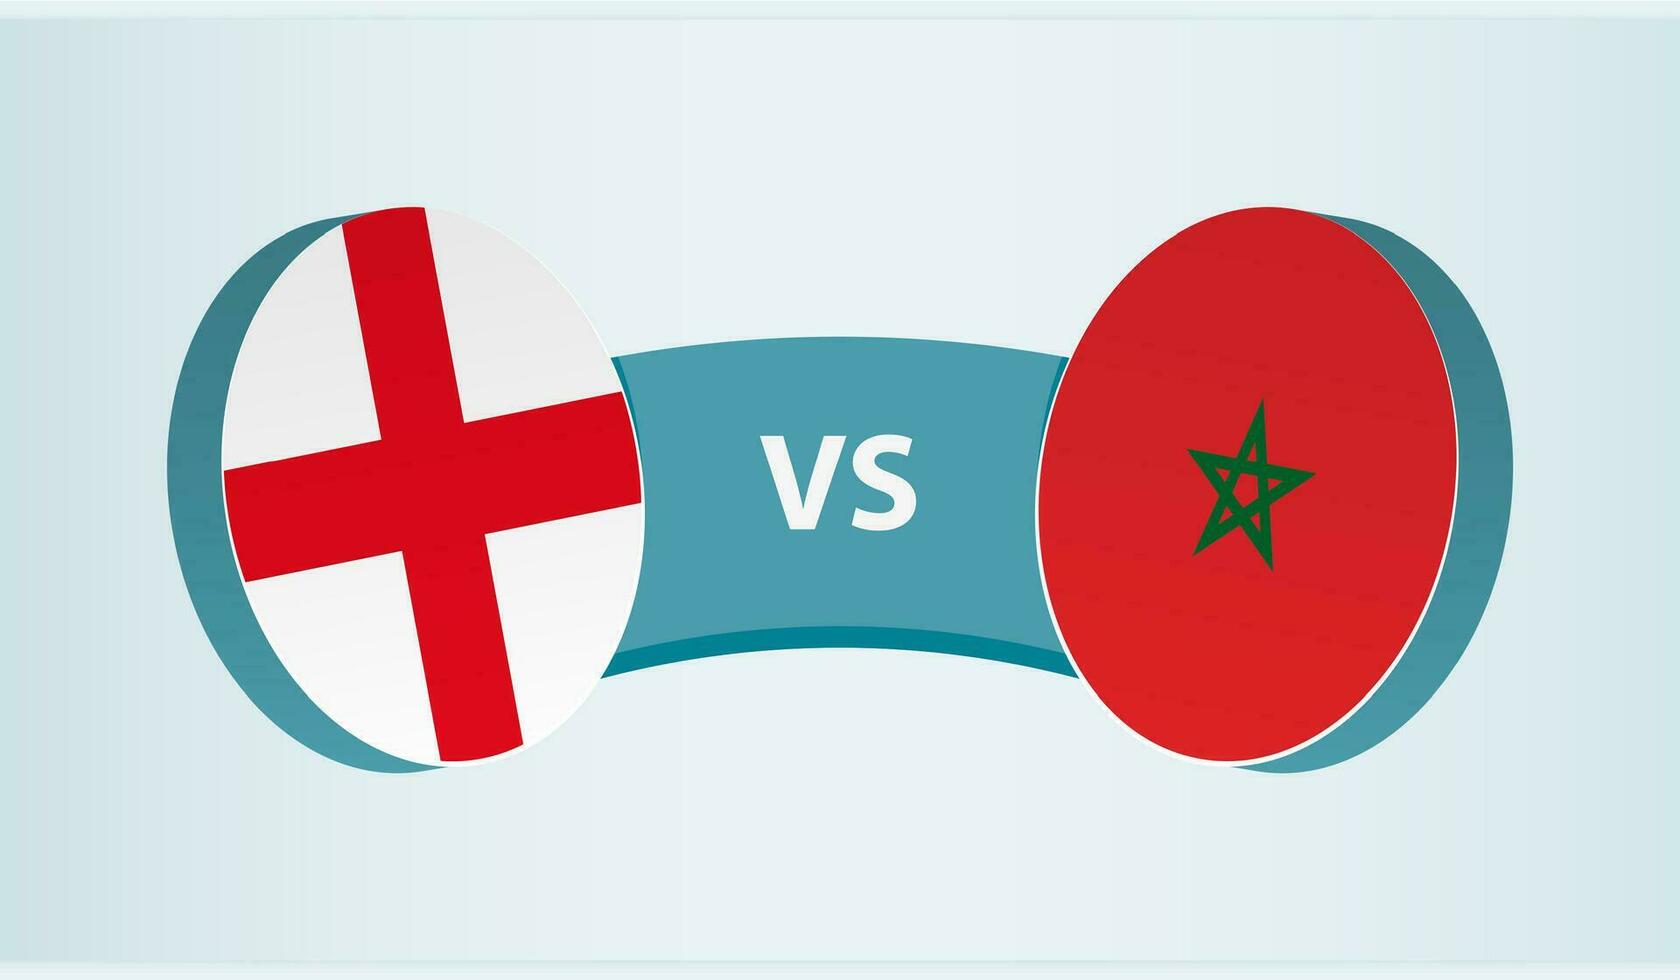 England versus Morocco, team sports competition concept. vector